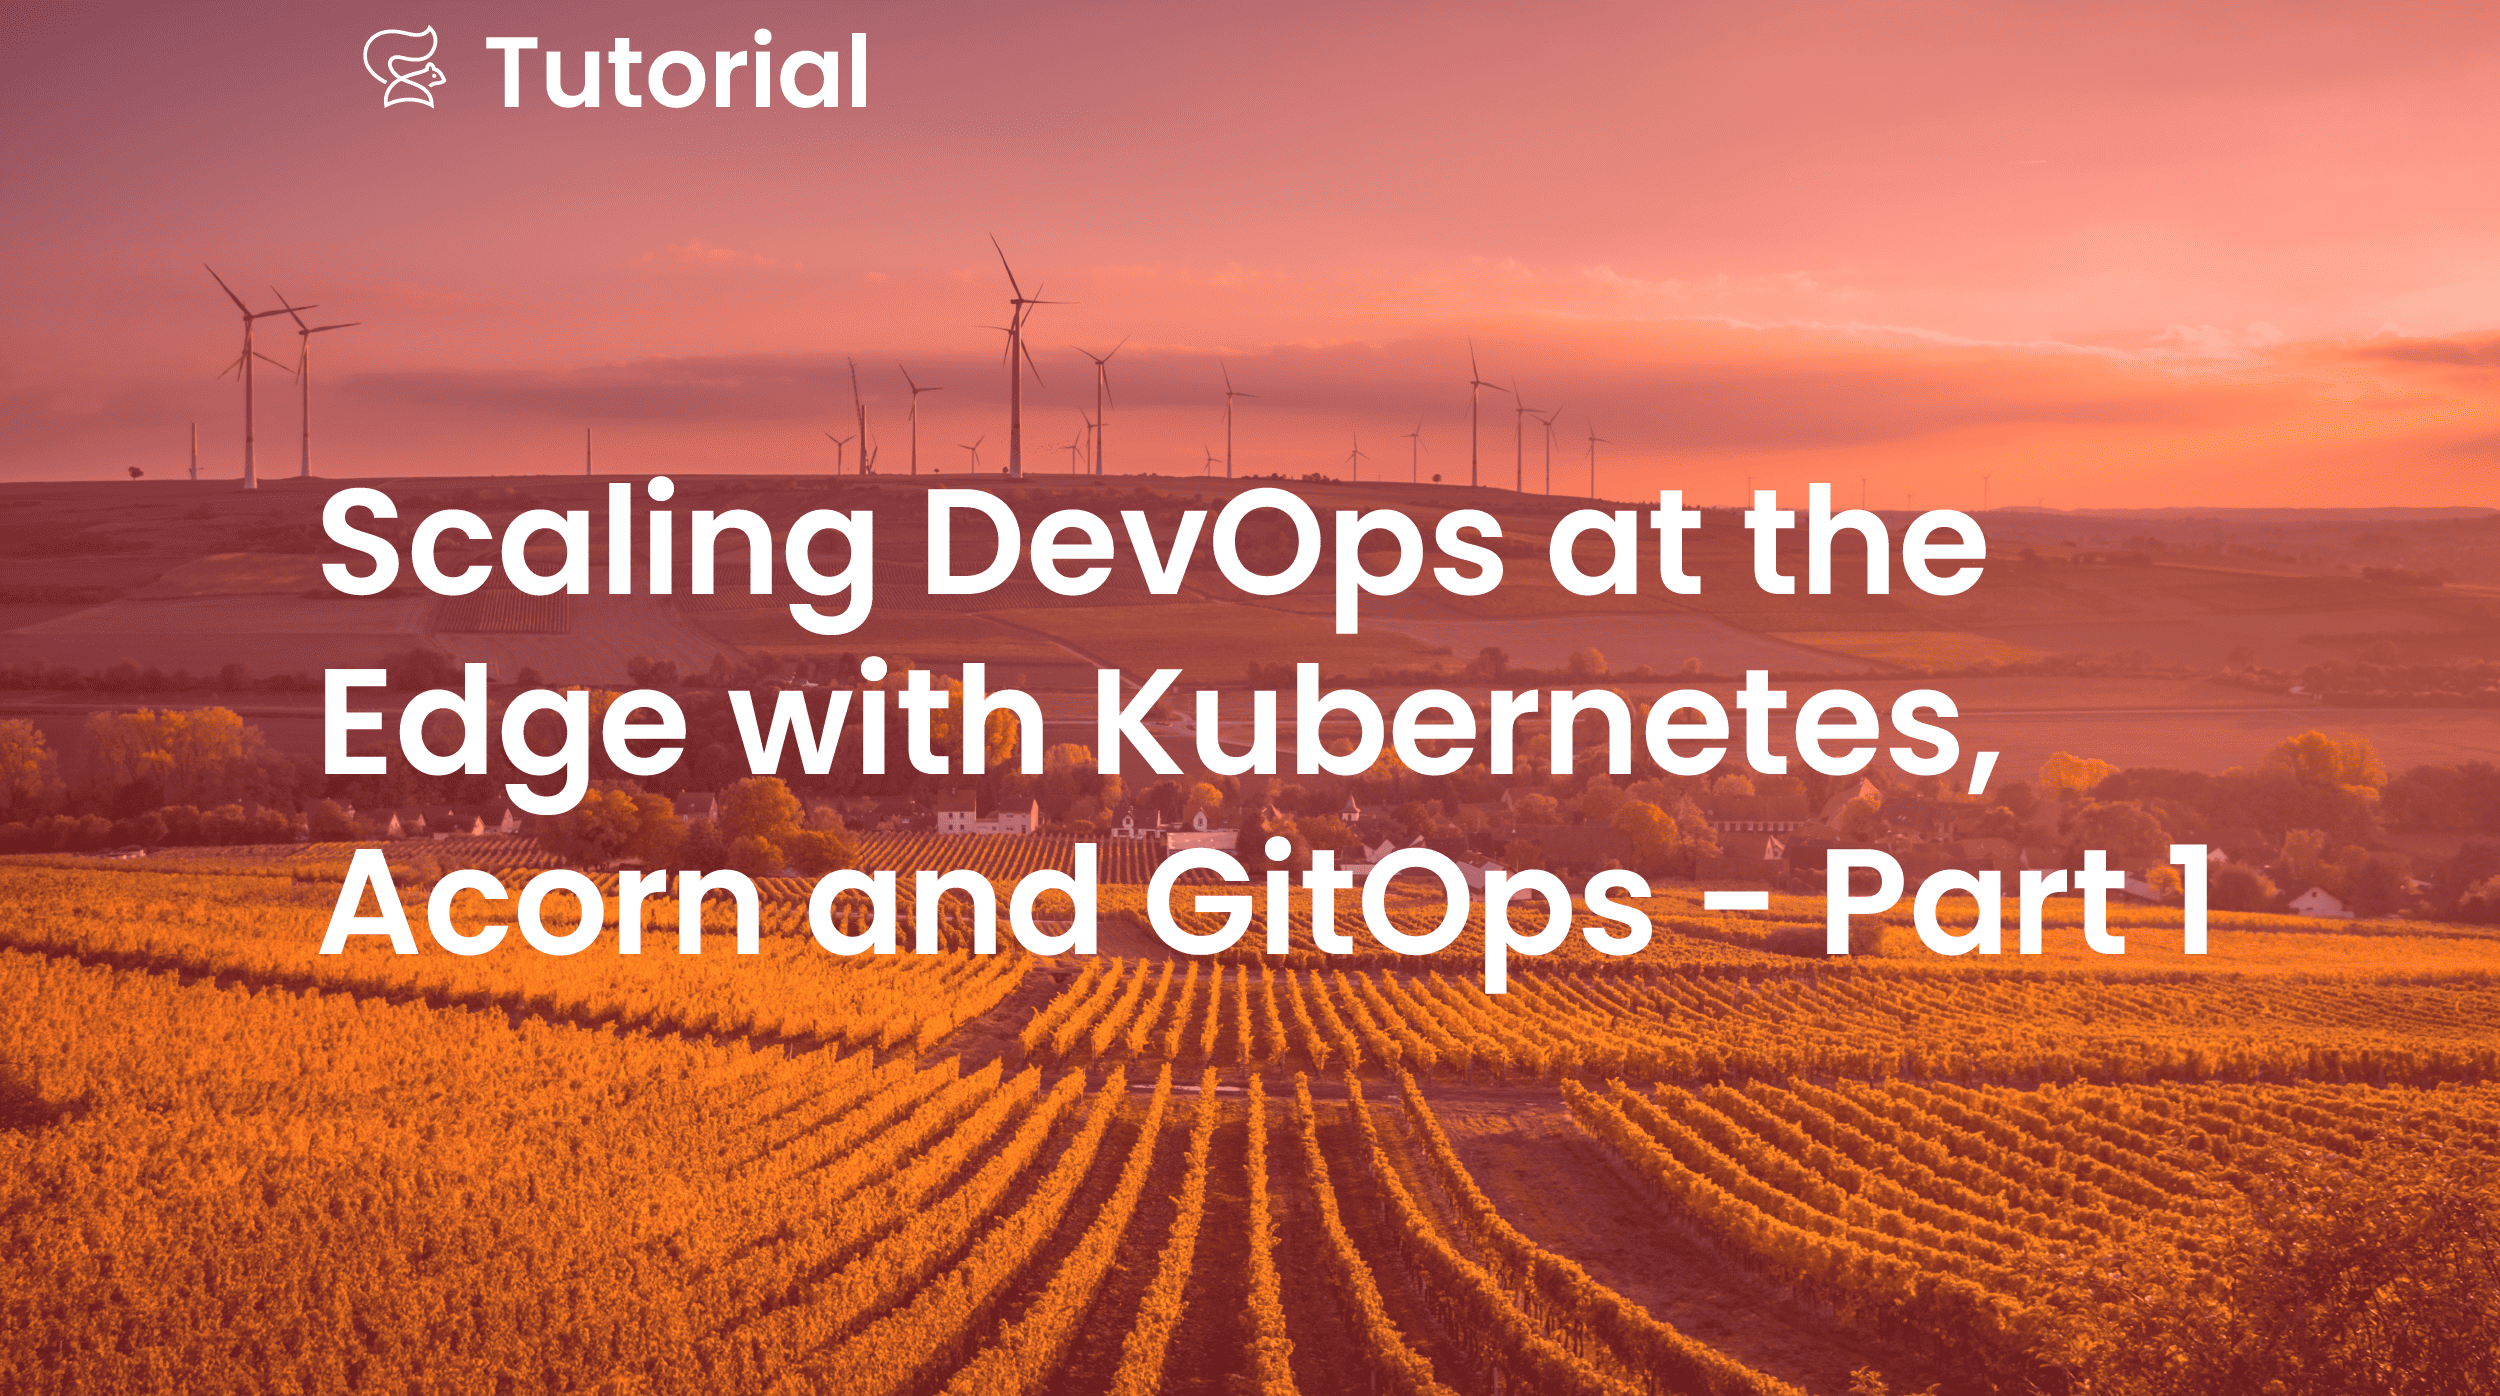 Scaling DevOps at the Edge with Kubernetes, Acorn and GitOps – Part 1